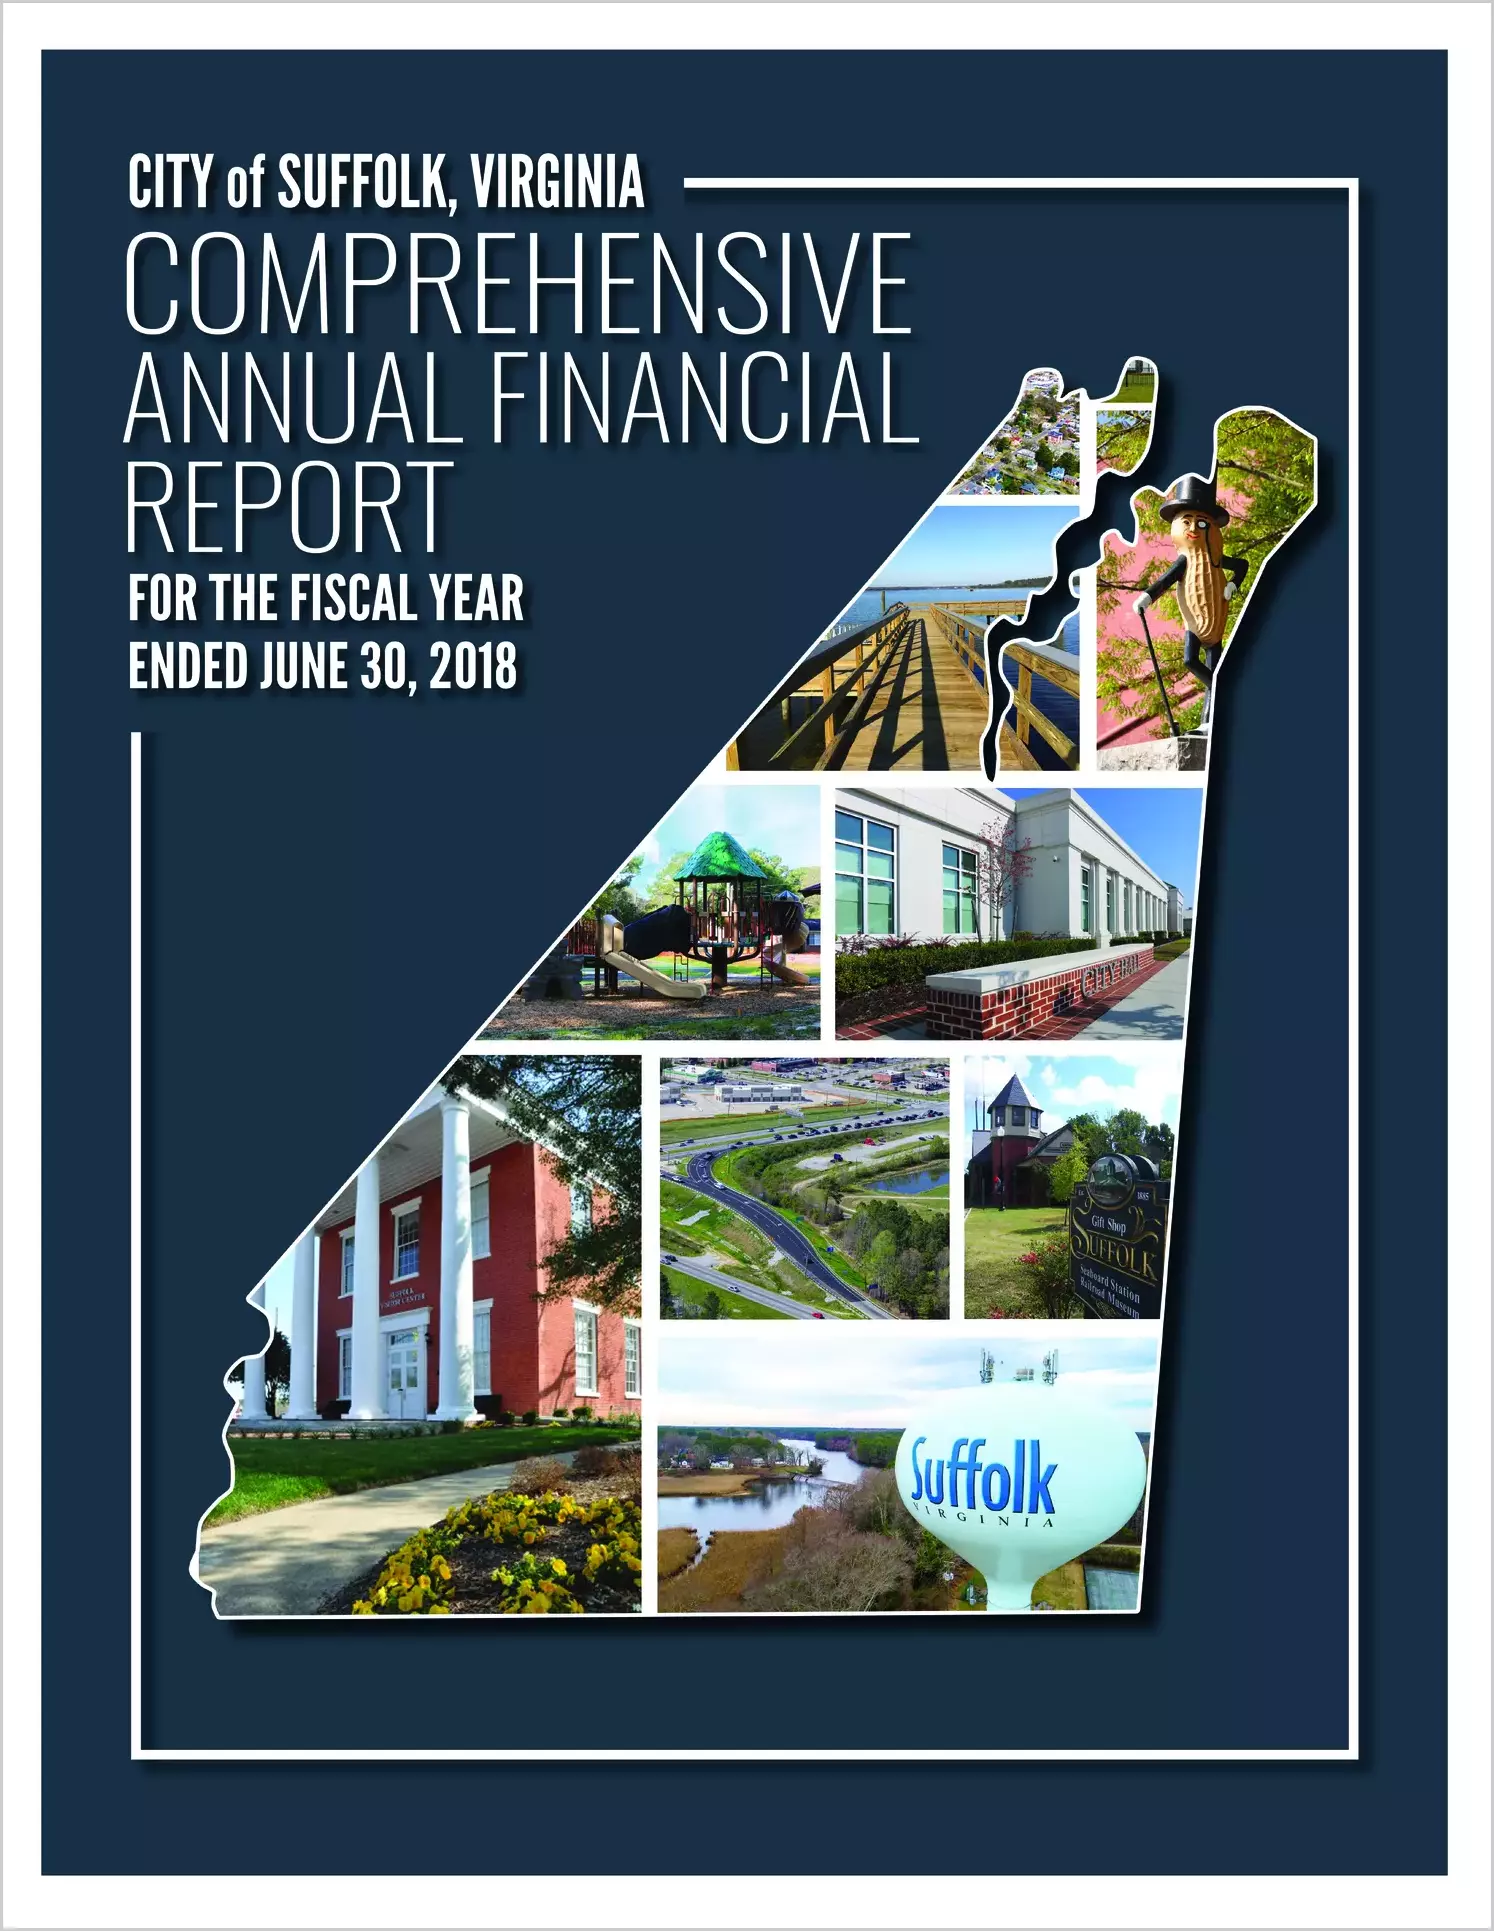 2018 Annual Financial Report for City of Suffolk